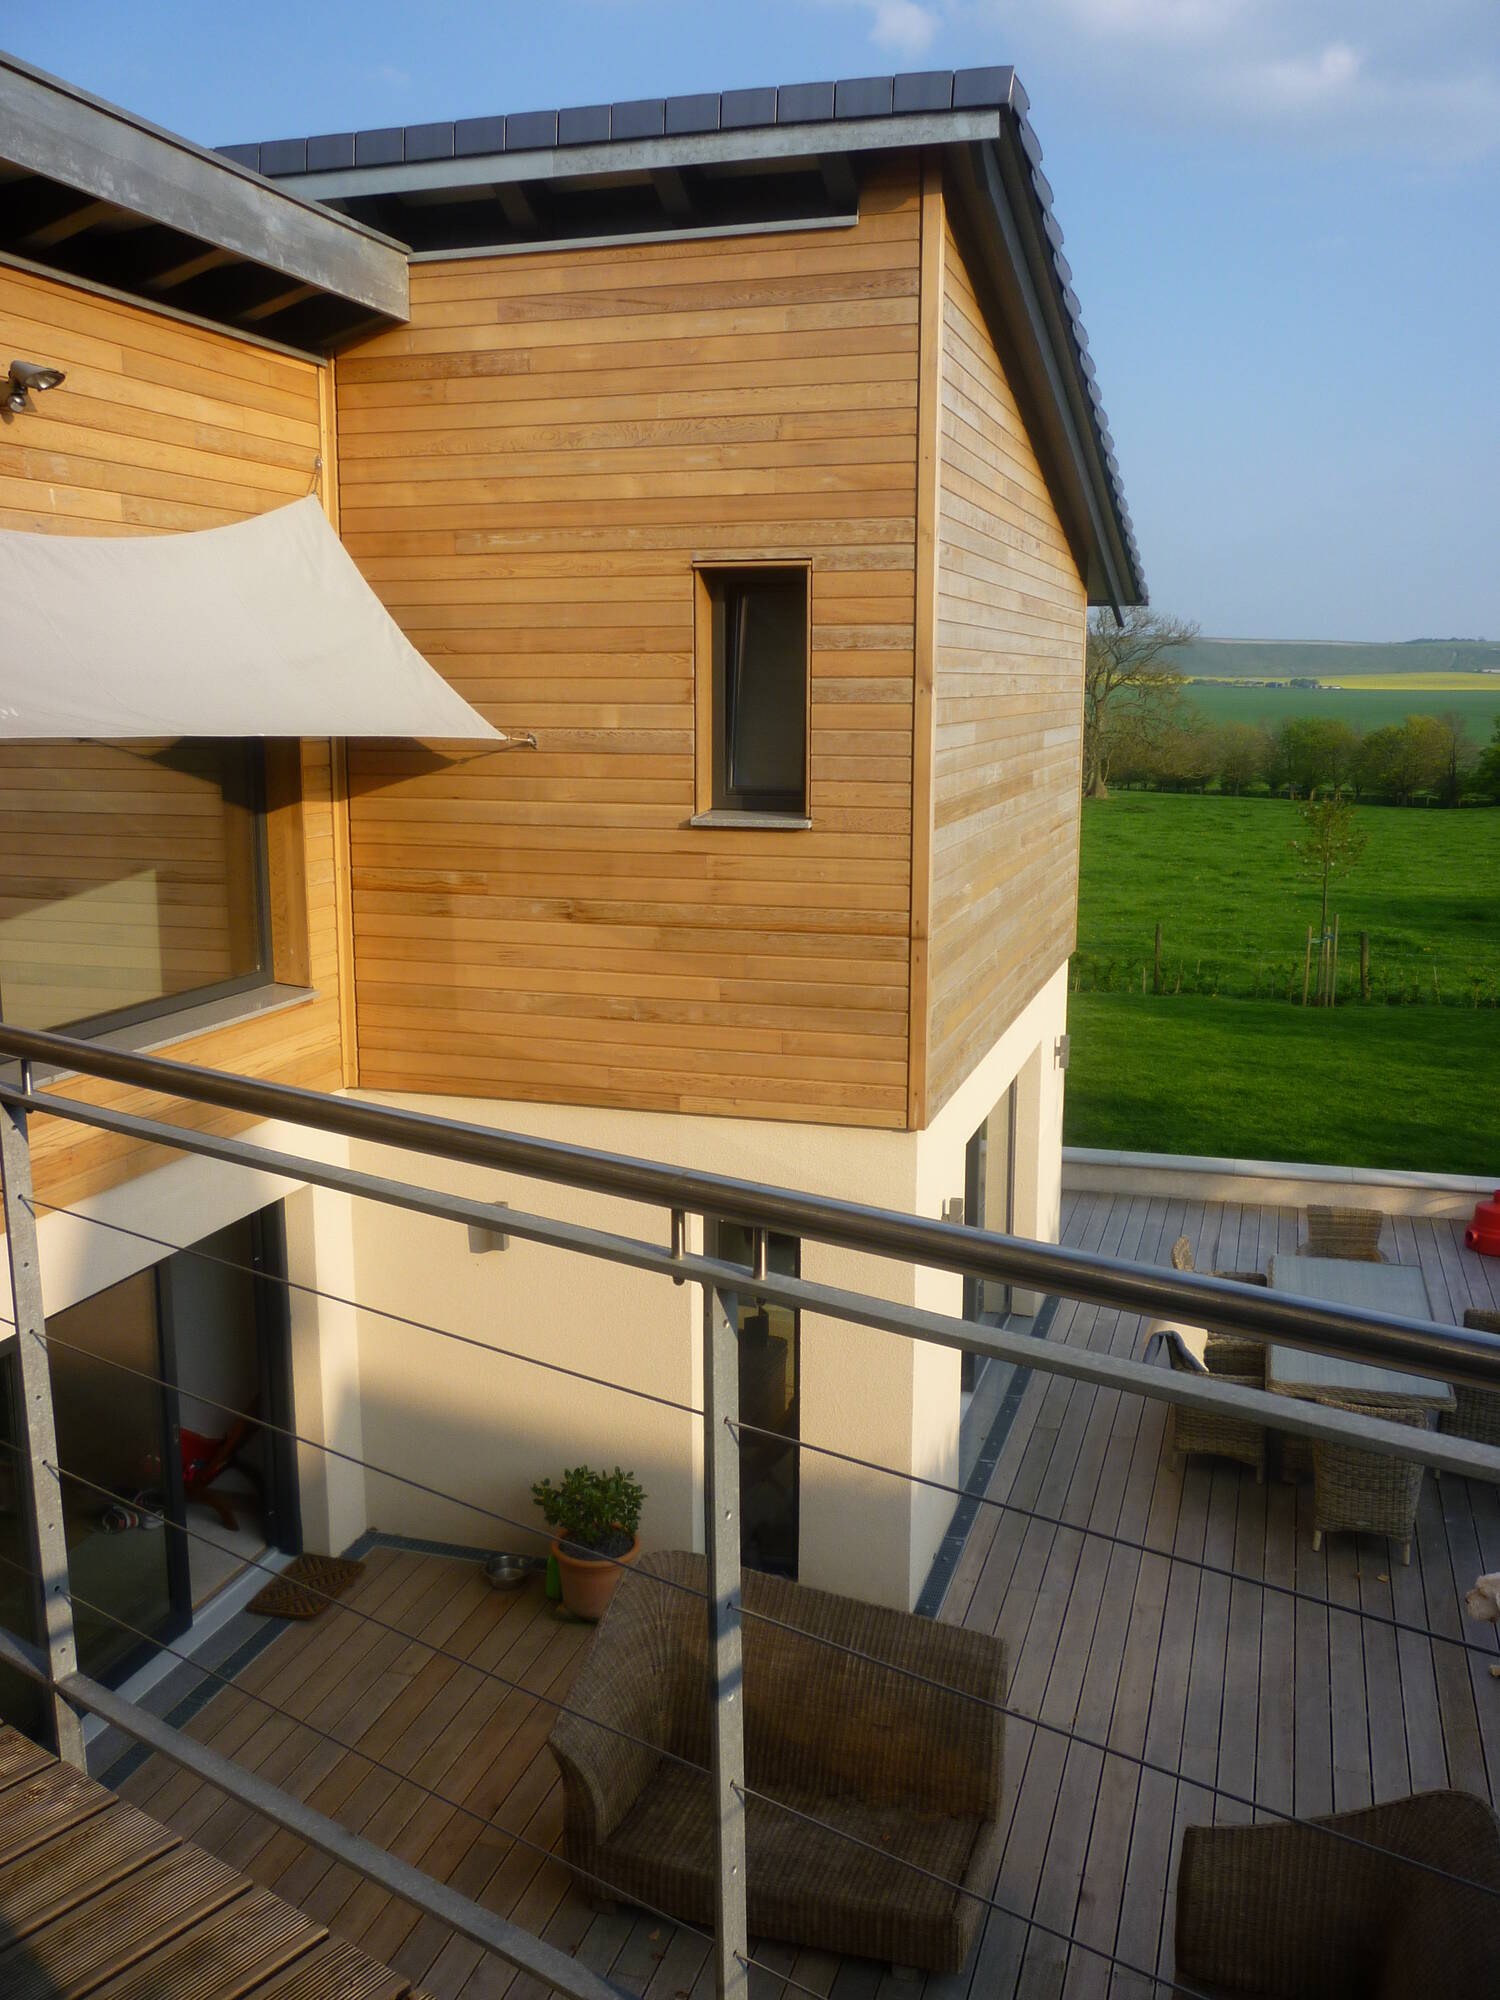 Sustainable prefab home with rainwater harvesting